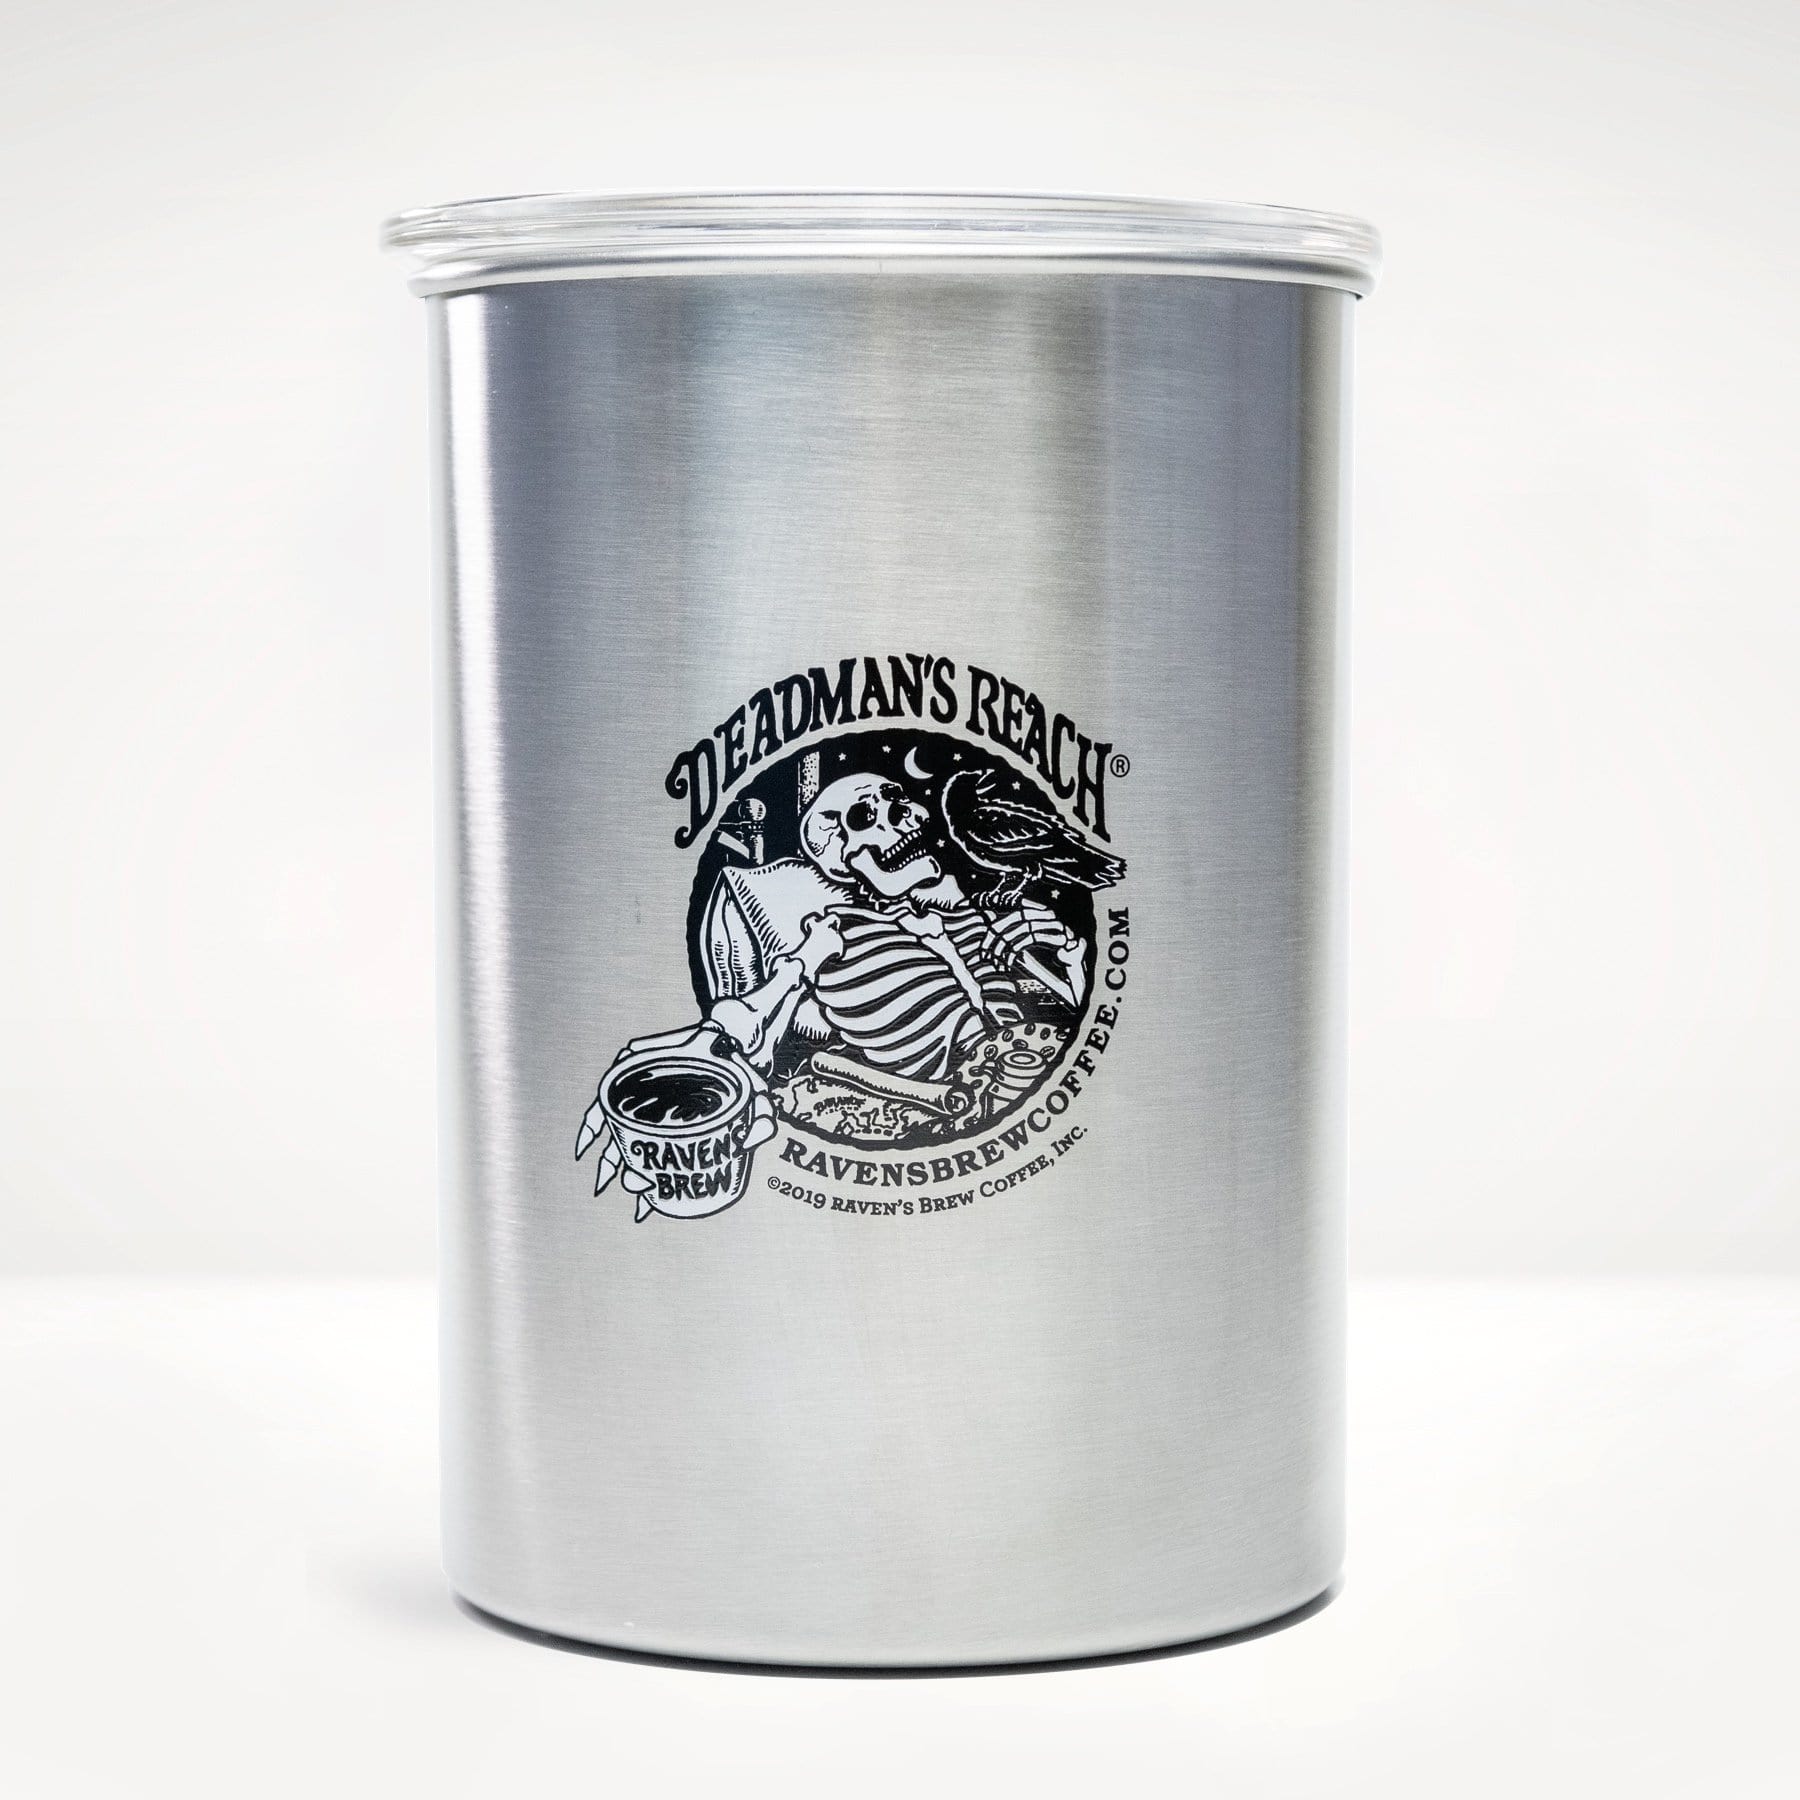 Deadman's Reach® coffee skeleton art in black and white with words Deadman's Reach® and Raven's Brew Coffee® on the front of a Airscape® Canister